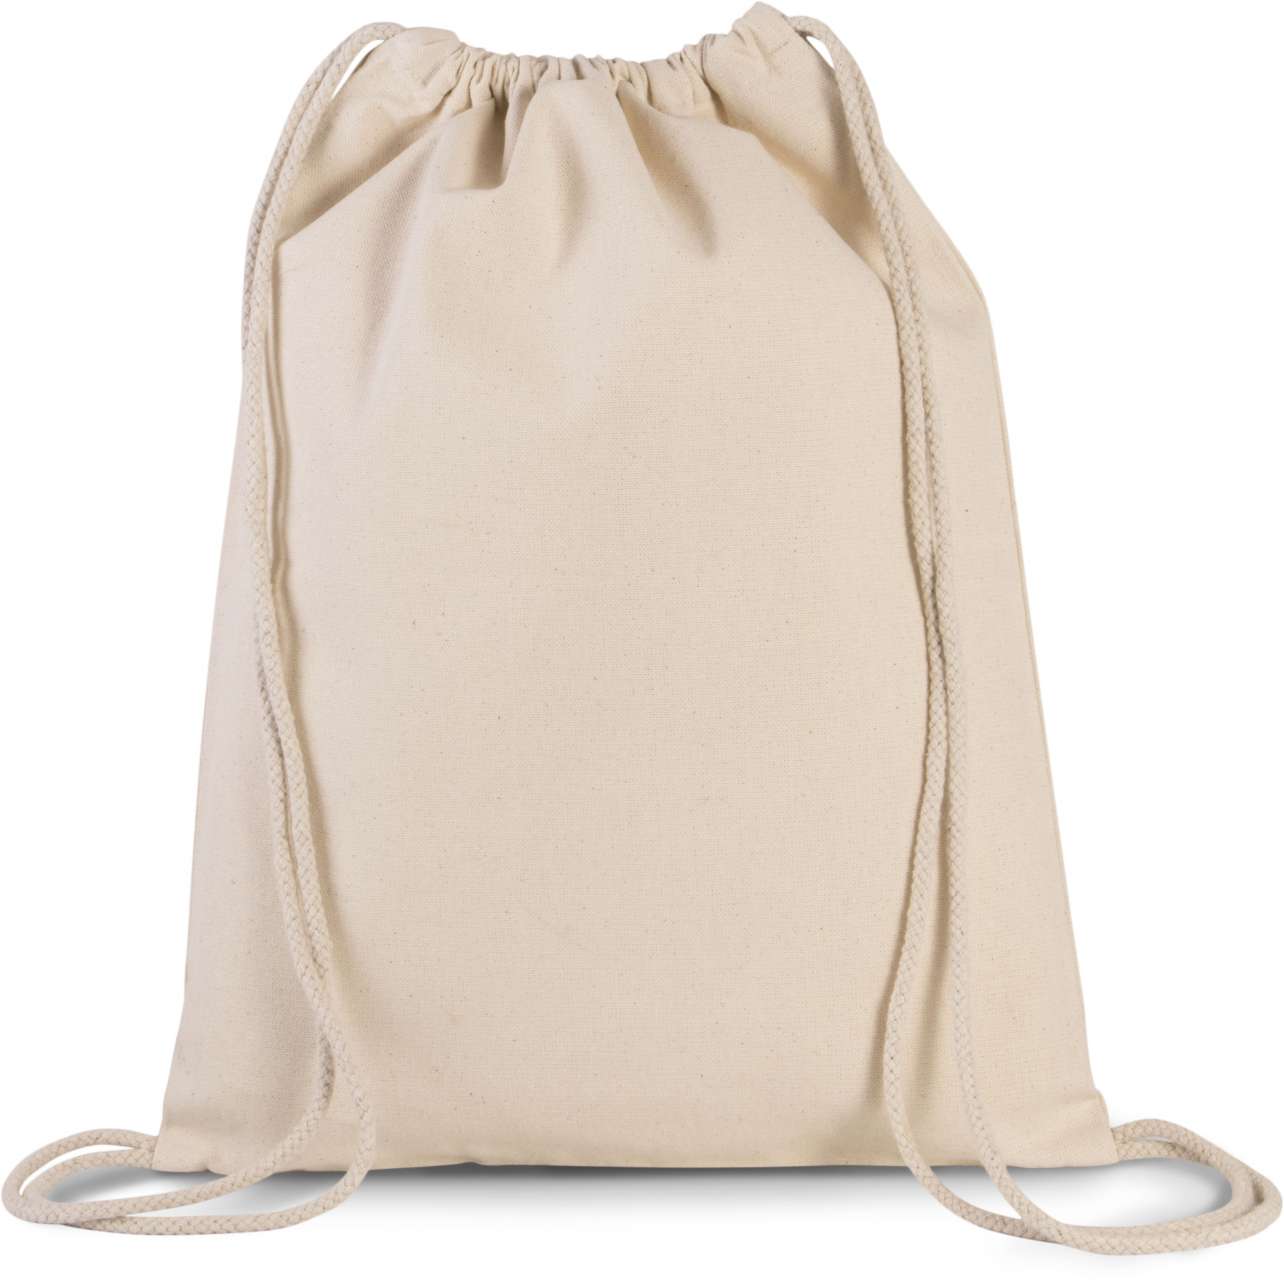 Promo  DRAWSTRING BAG WITH THICK STRAPS